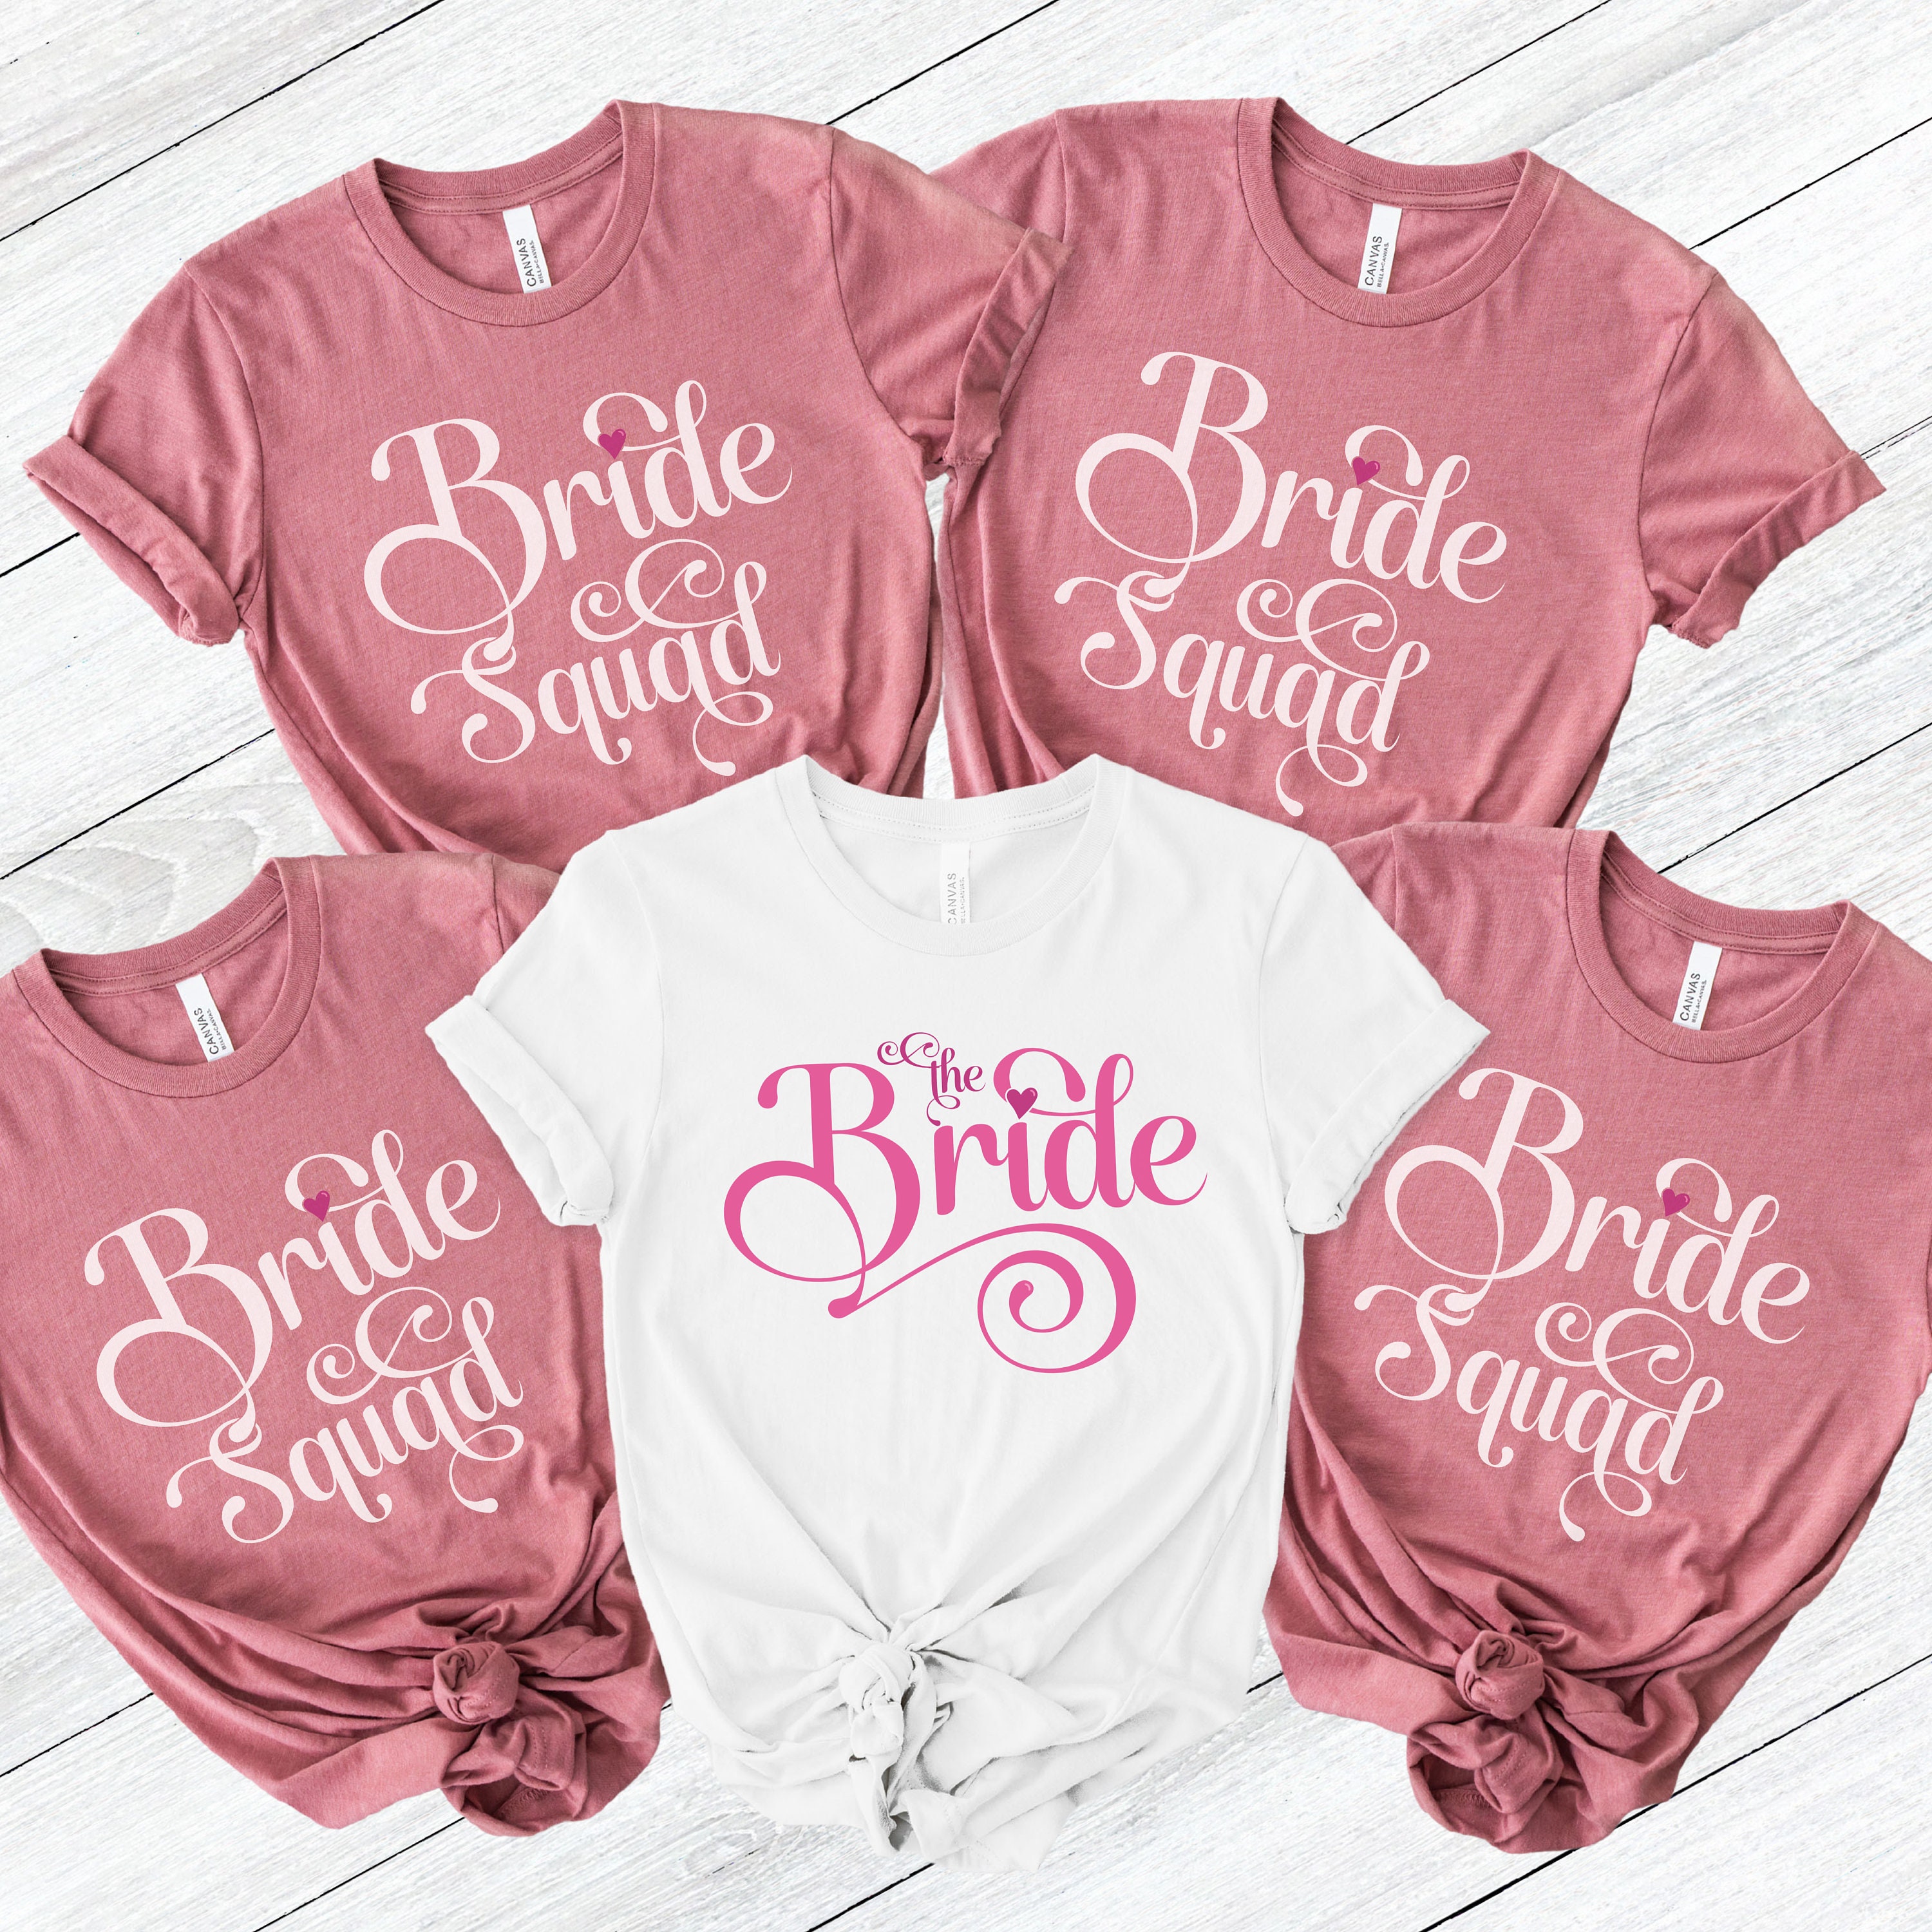 Lingerie Tee Shirt, Lingerie Bachelorette Party, Bride to Be Gift